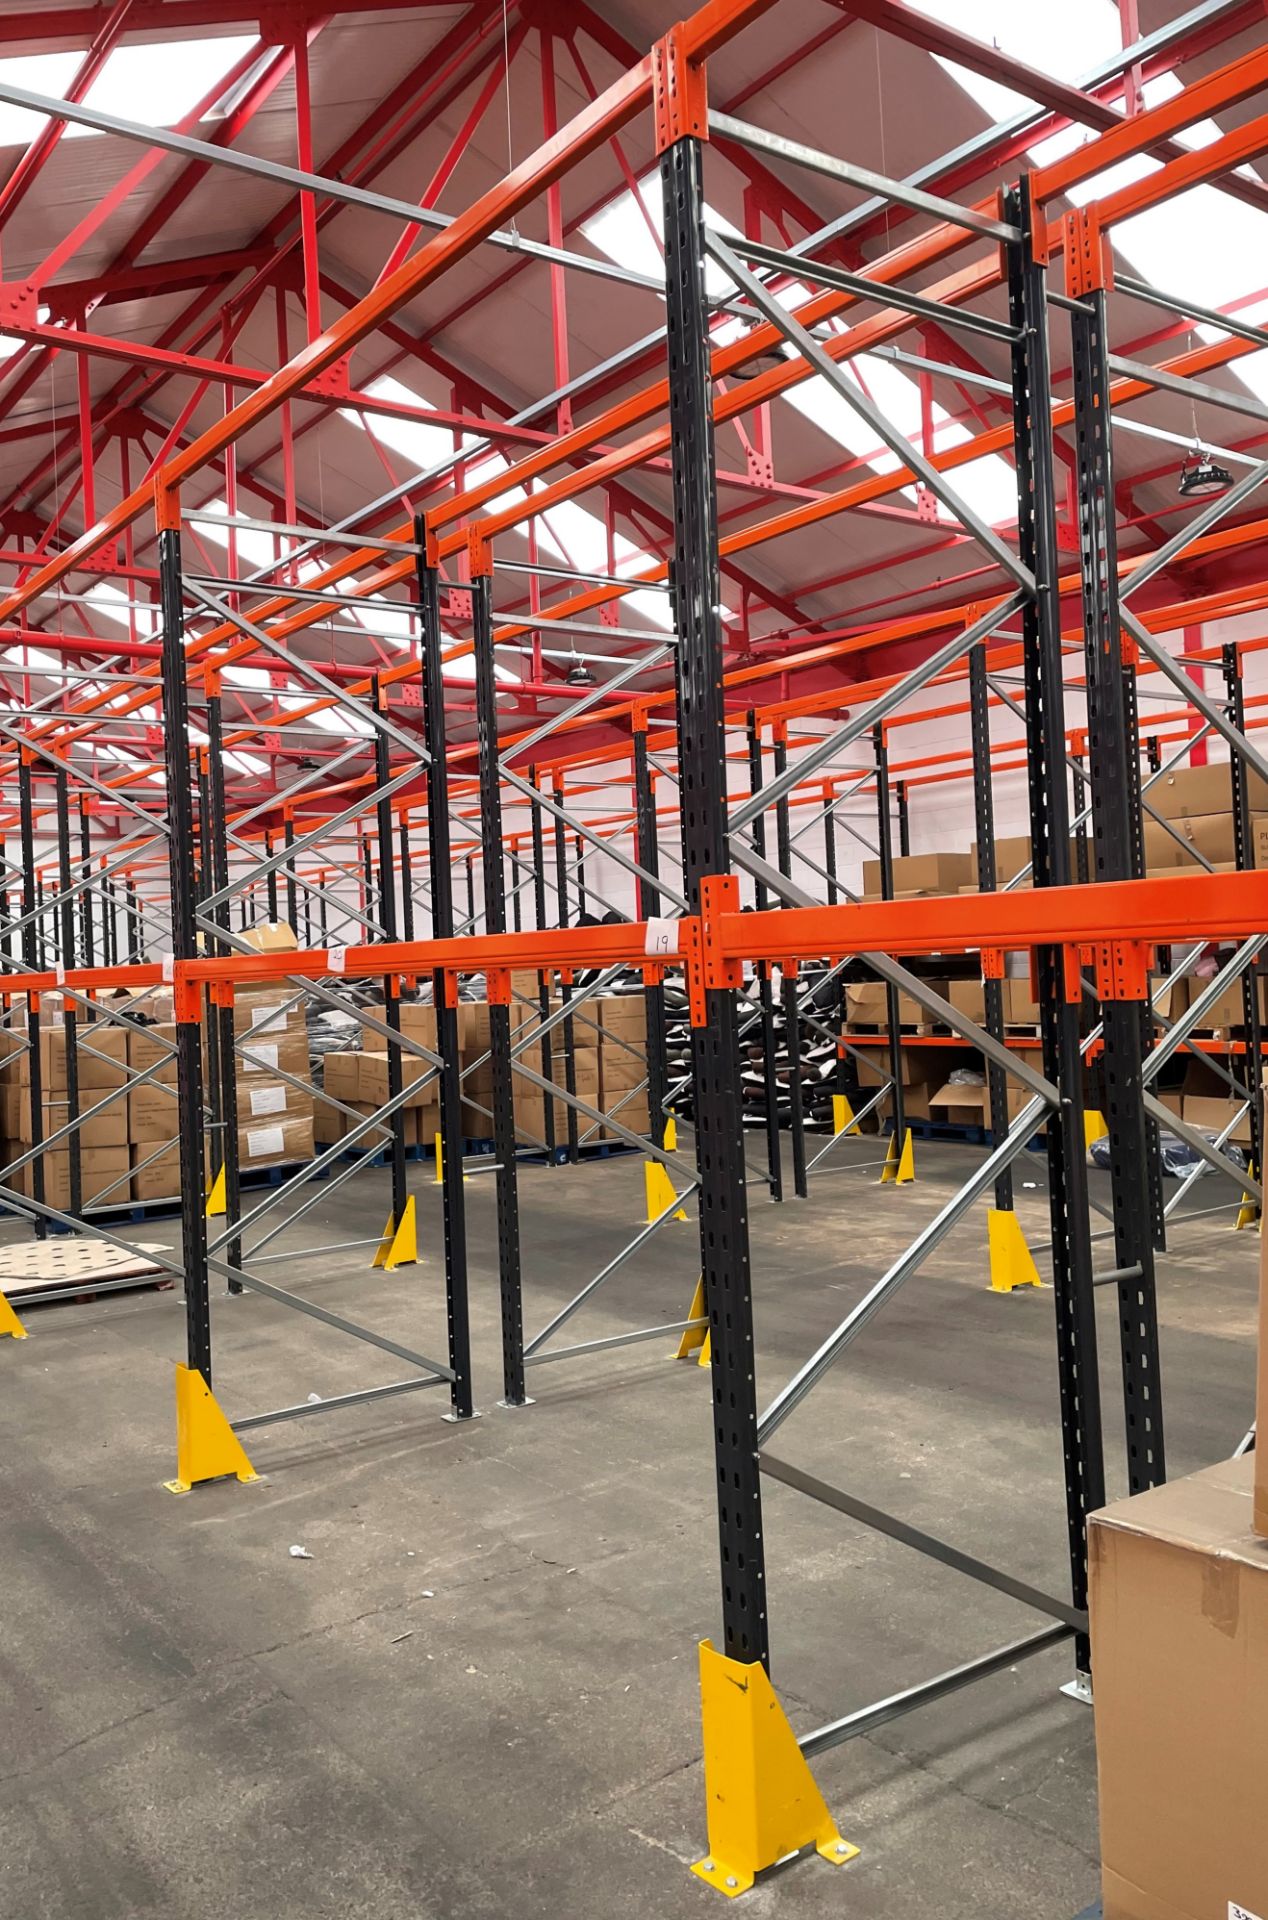 18 Bays of Link 51 Pallet Racking w/ Protection Barriers | CONTENTS NOT INCLUDED - Image 2 of 4